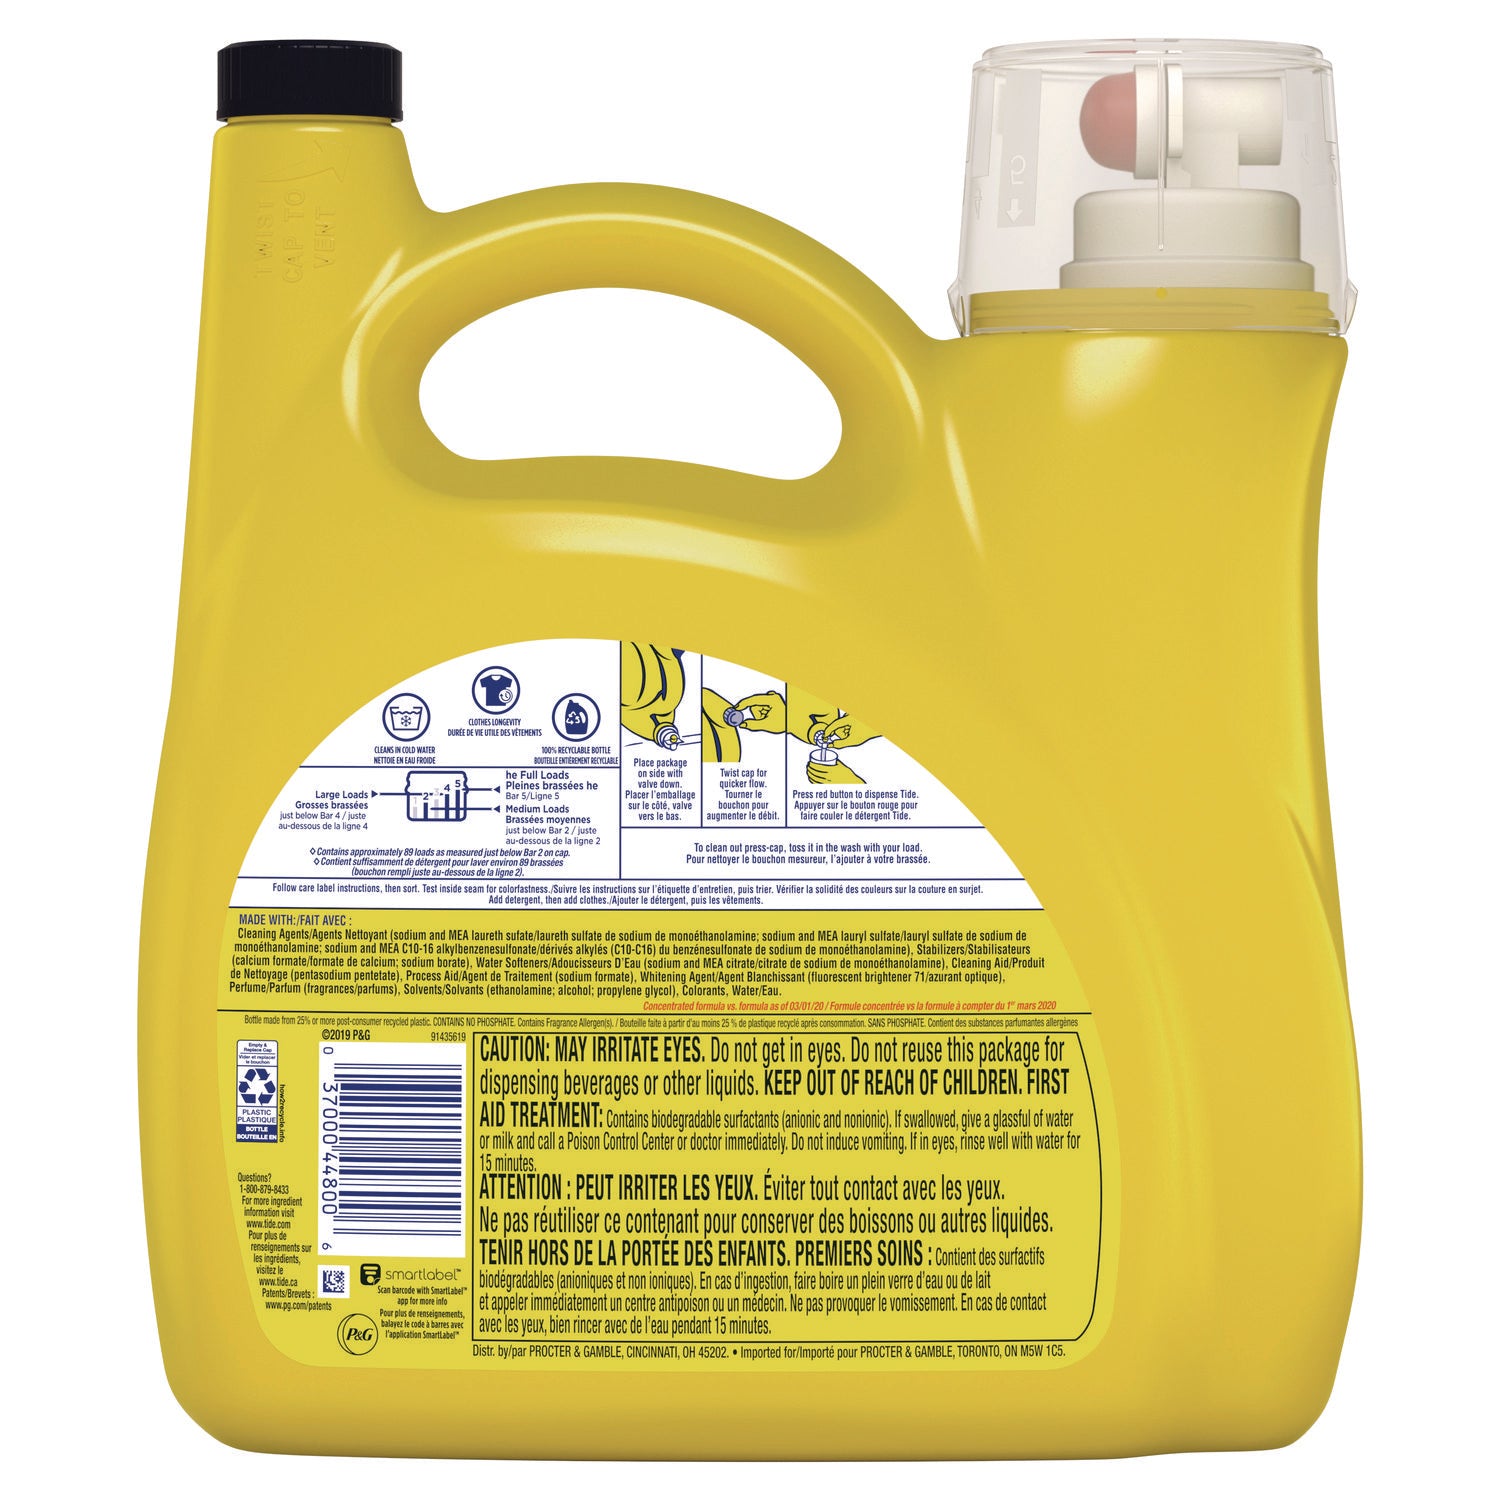 simply-clean-and-fresh-laundry-detergent-daybreak-fresh-128-oz-bottle_pgc8913044800 - 4